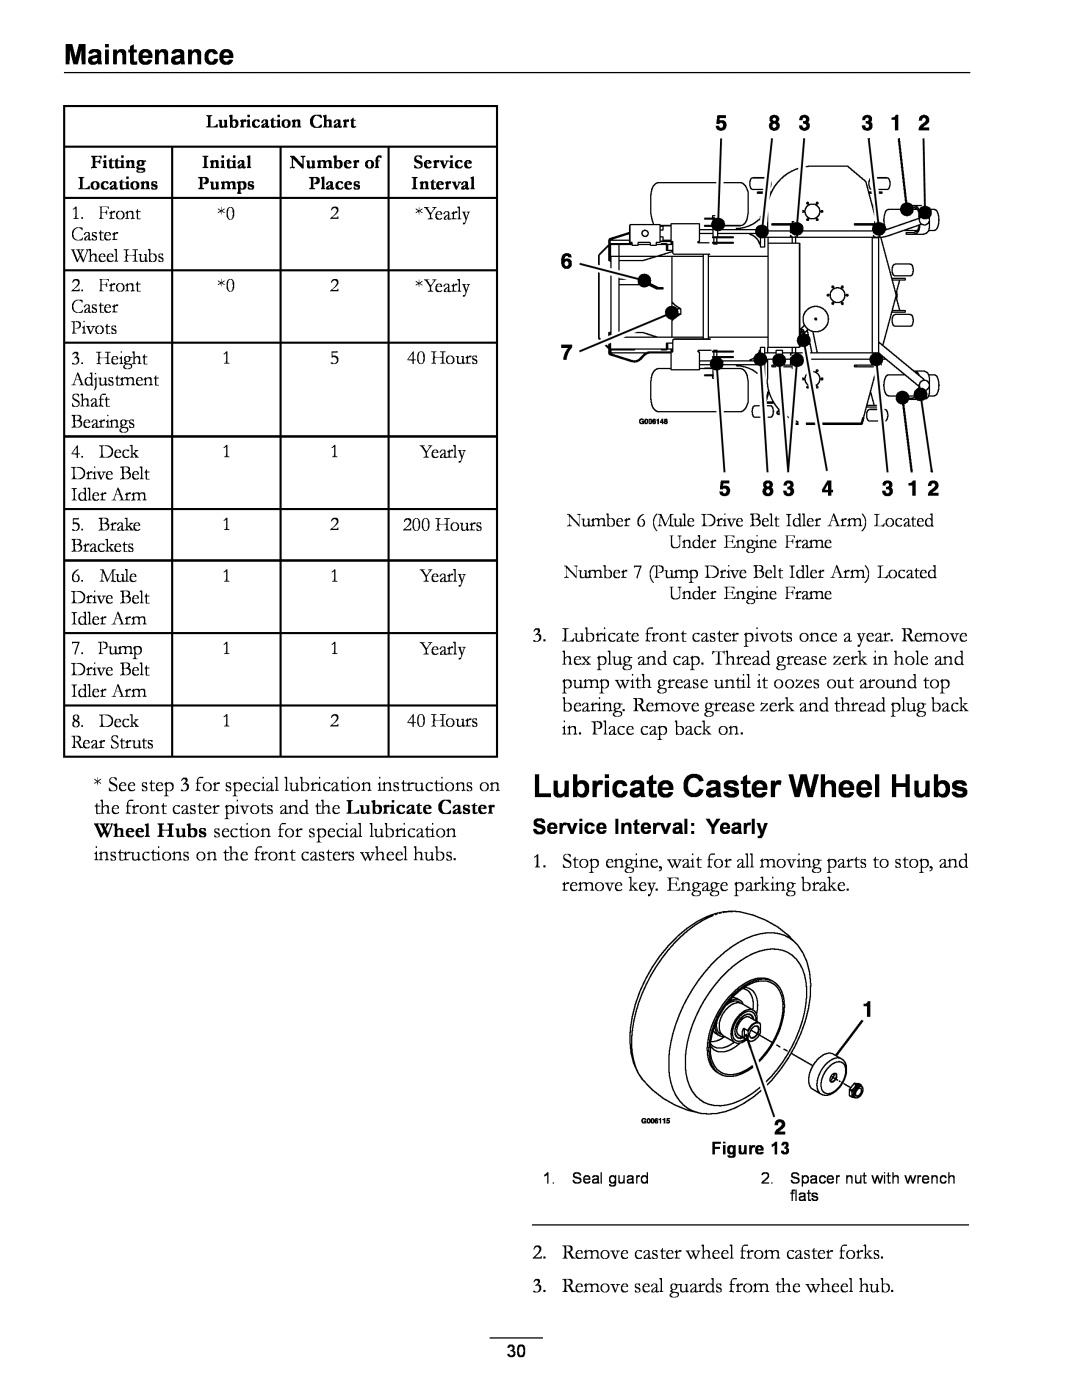 Exmark LZ27KC604 Lubricate Caster Wheel Hubs, Maintenance, Service Interval Yearly, Lubrication Chart, Fitting, Initial 